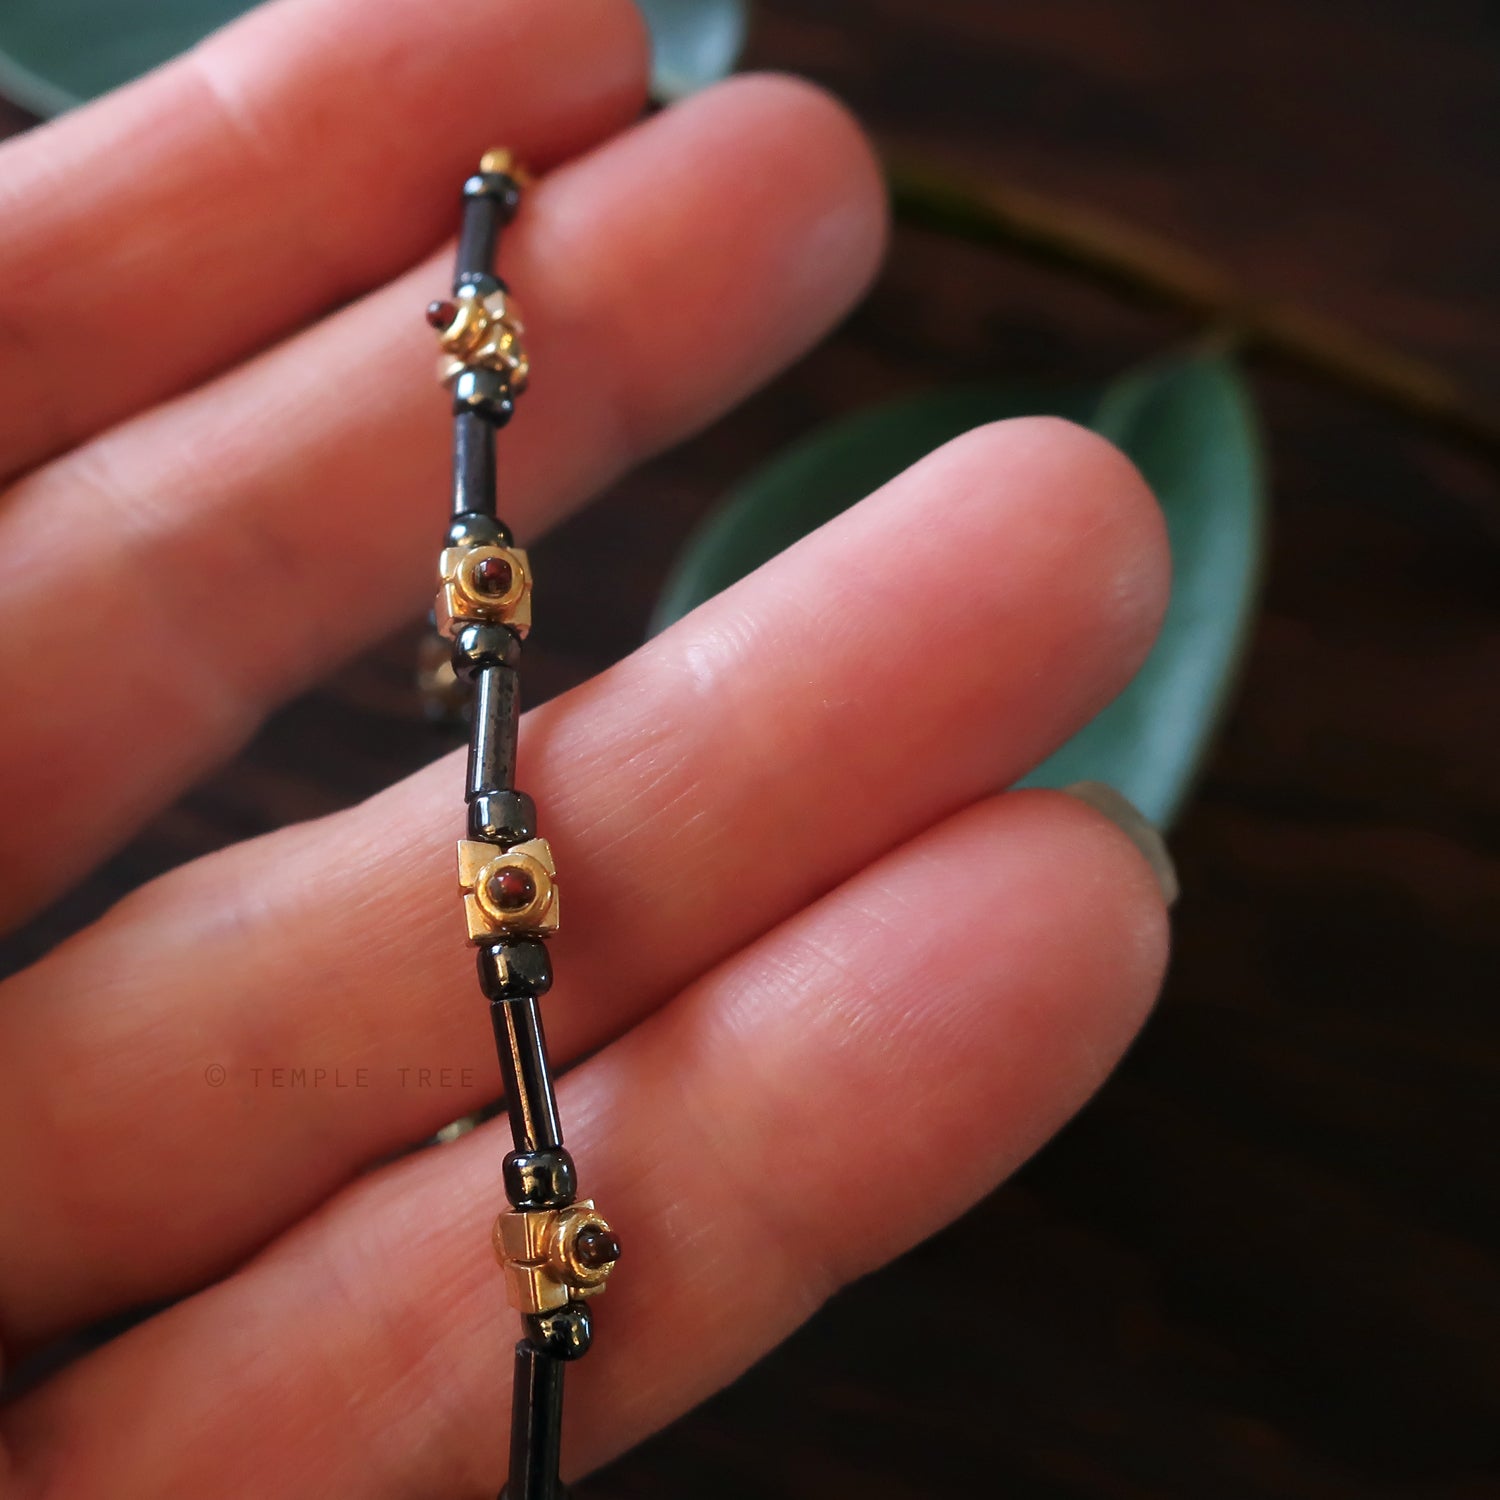 Temple Tree Lost Circuitry Beadwoven Bracelet v1 - Grey, Gold and Faux Bloodstone